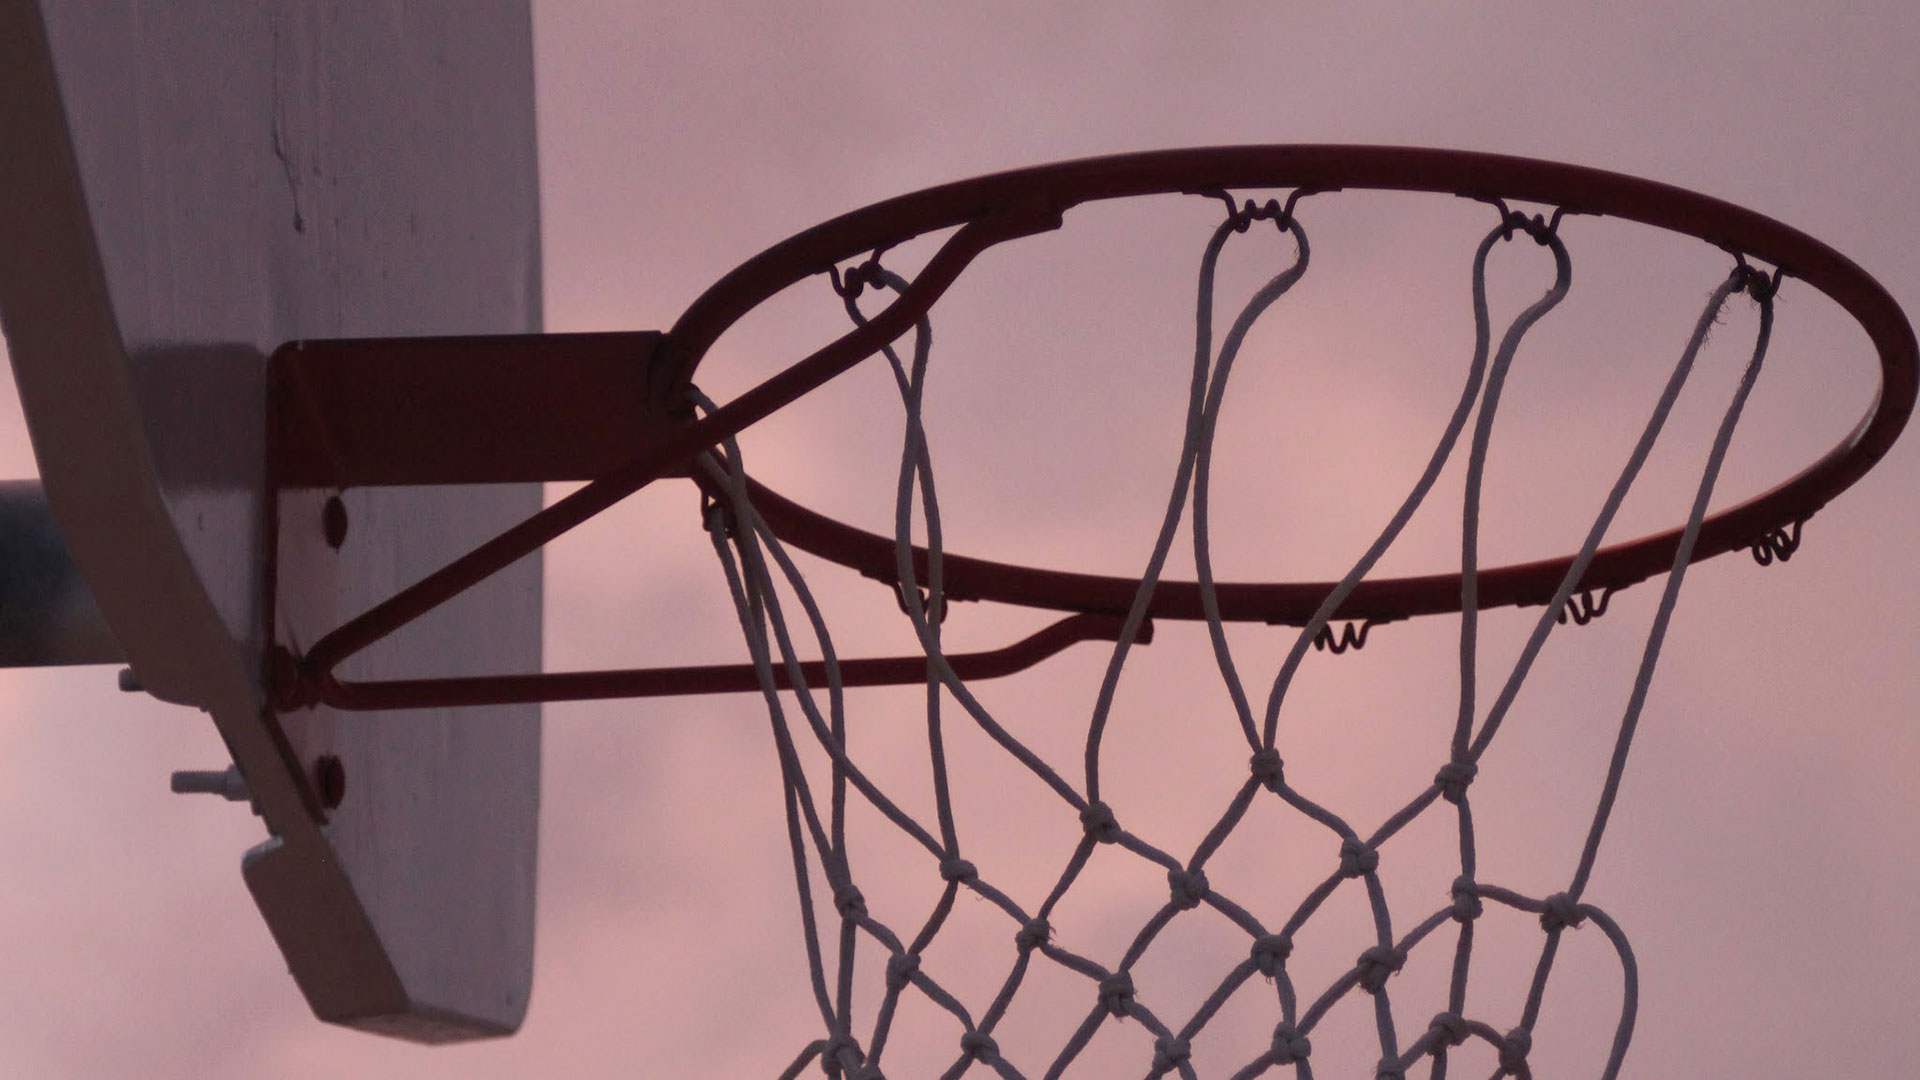 A basketball hoop is silhouetted against the sunset.